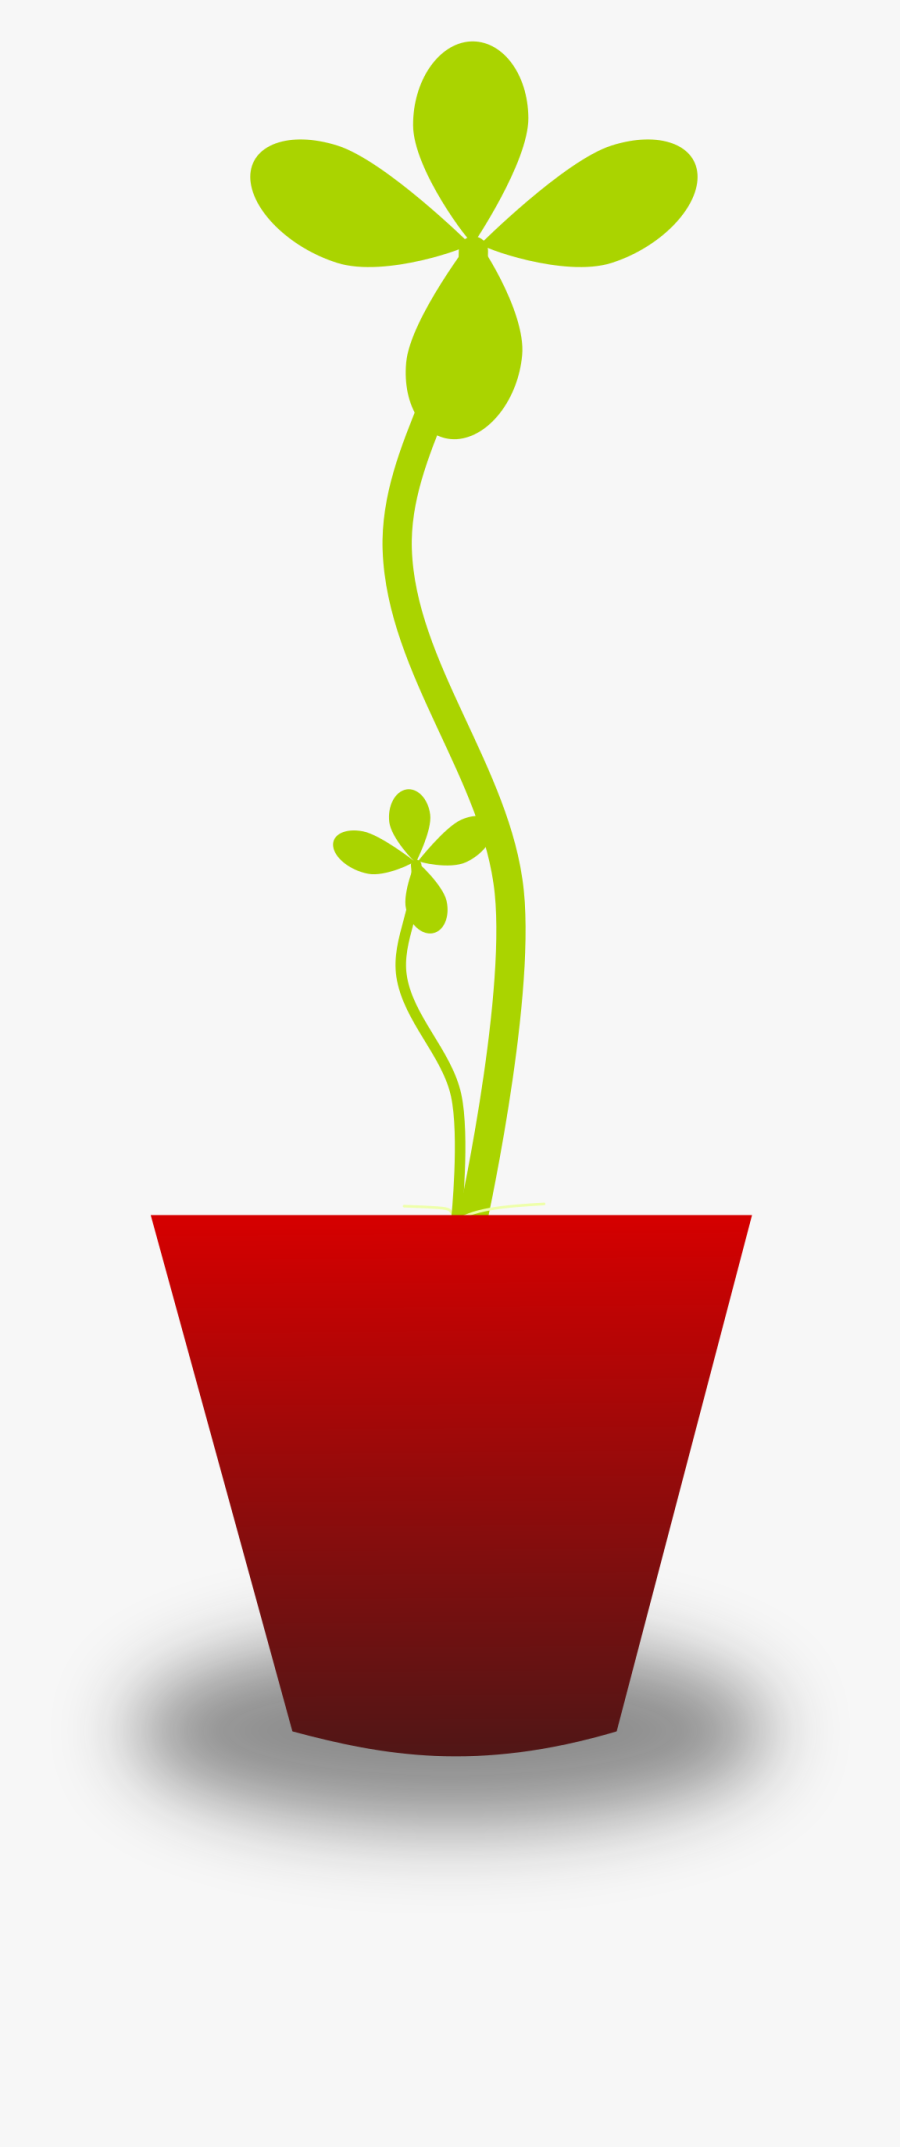 Potted Plants Clipart Sapling - Cartoon Potted Plant Transparent, Transparent Clipart